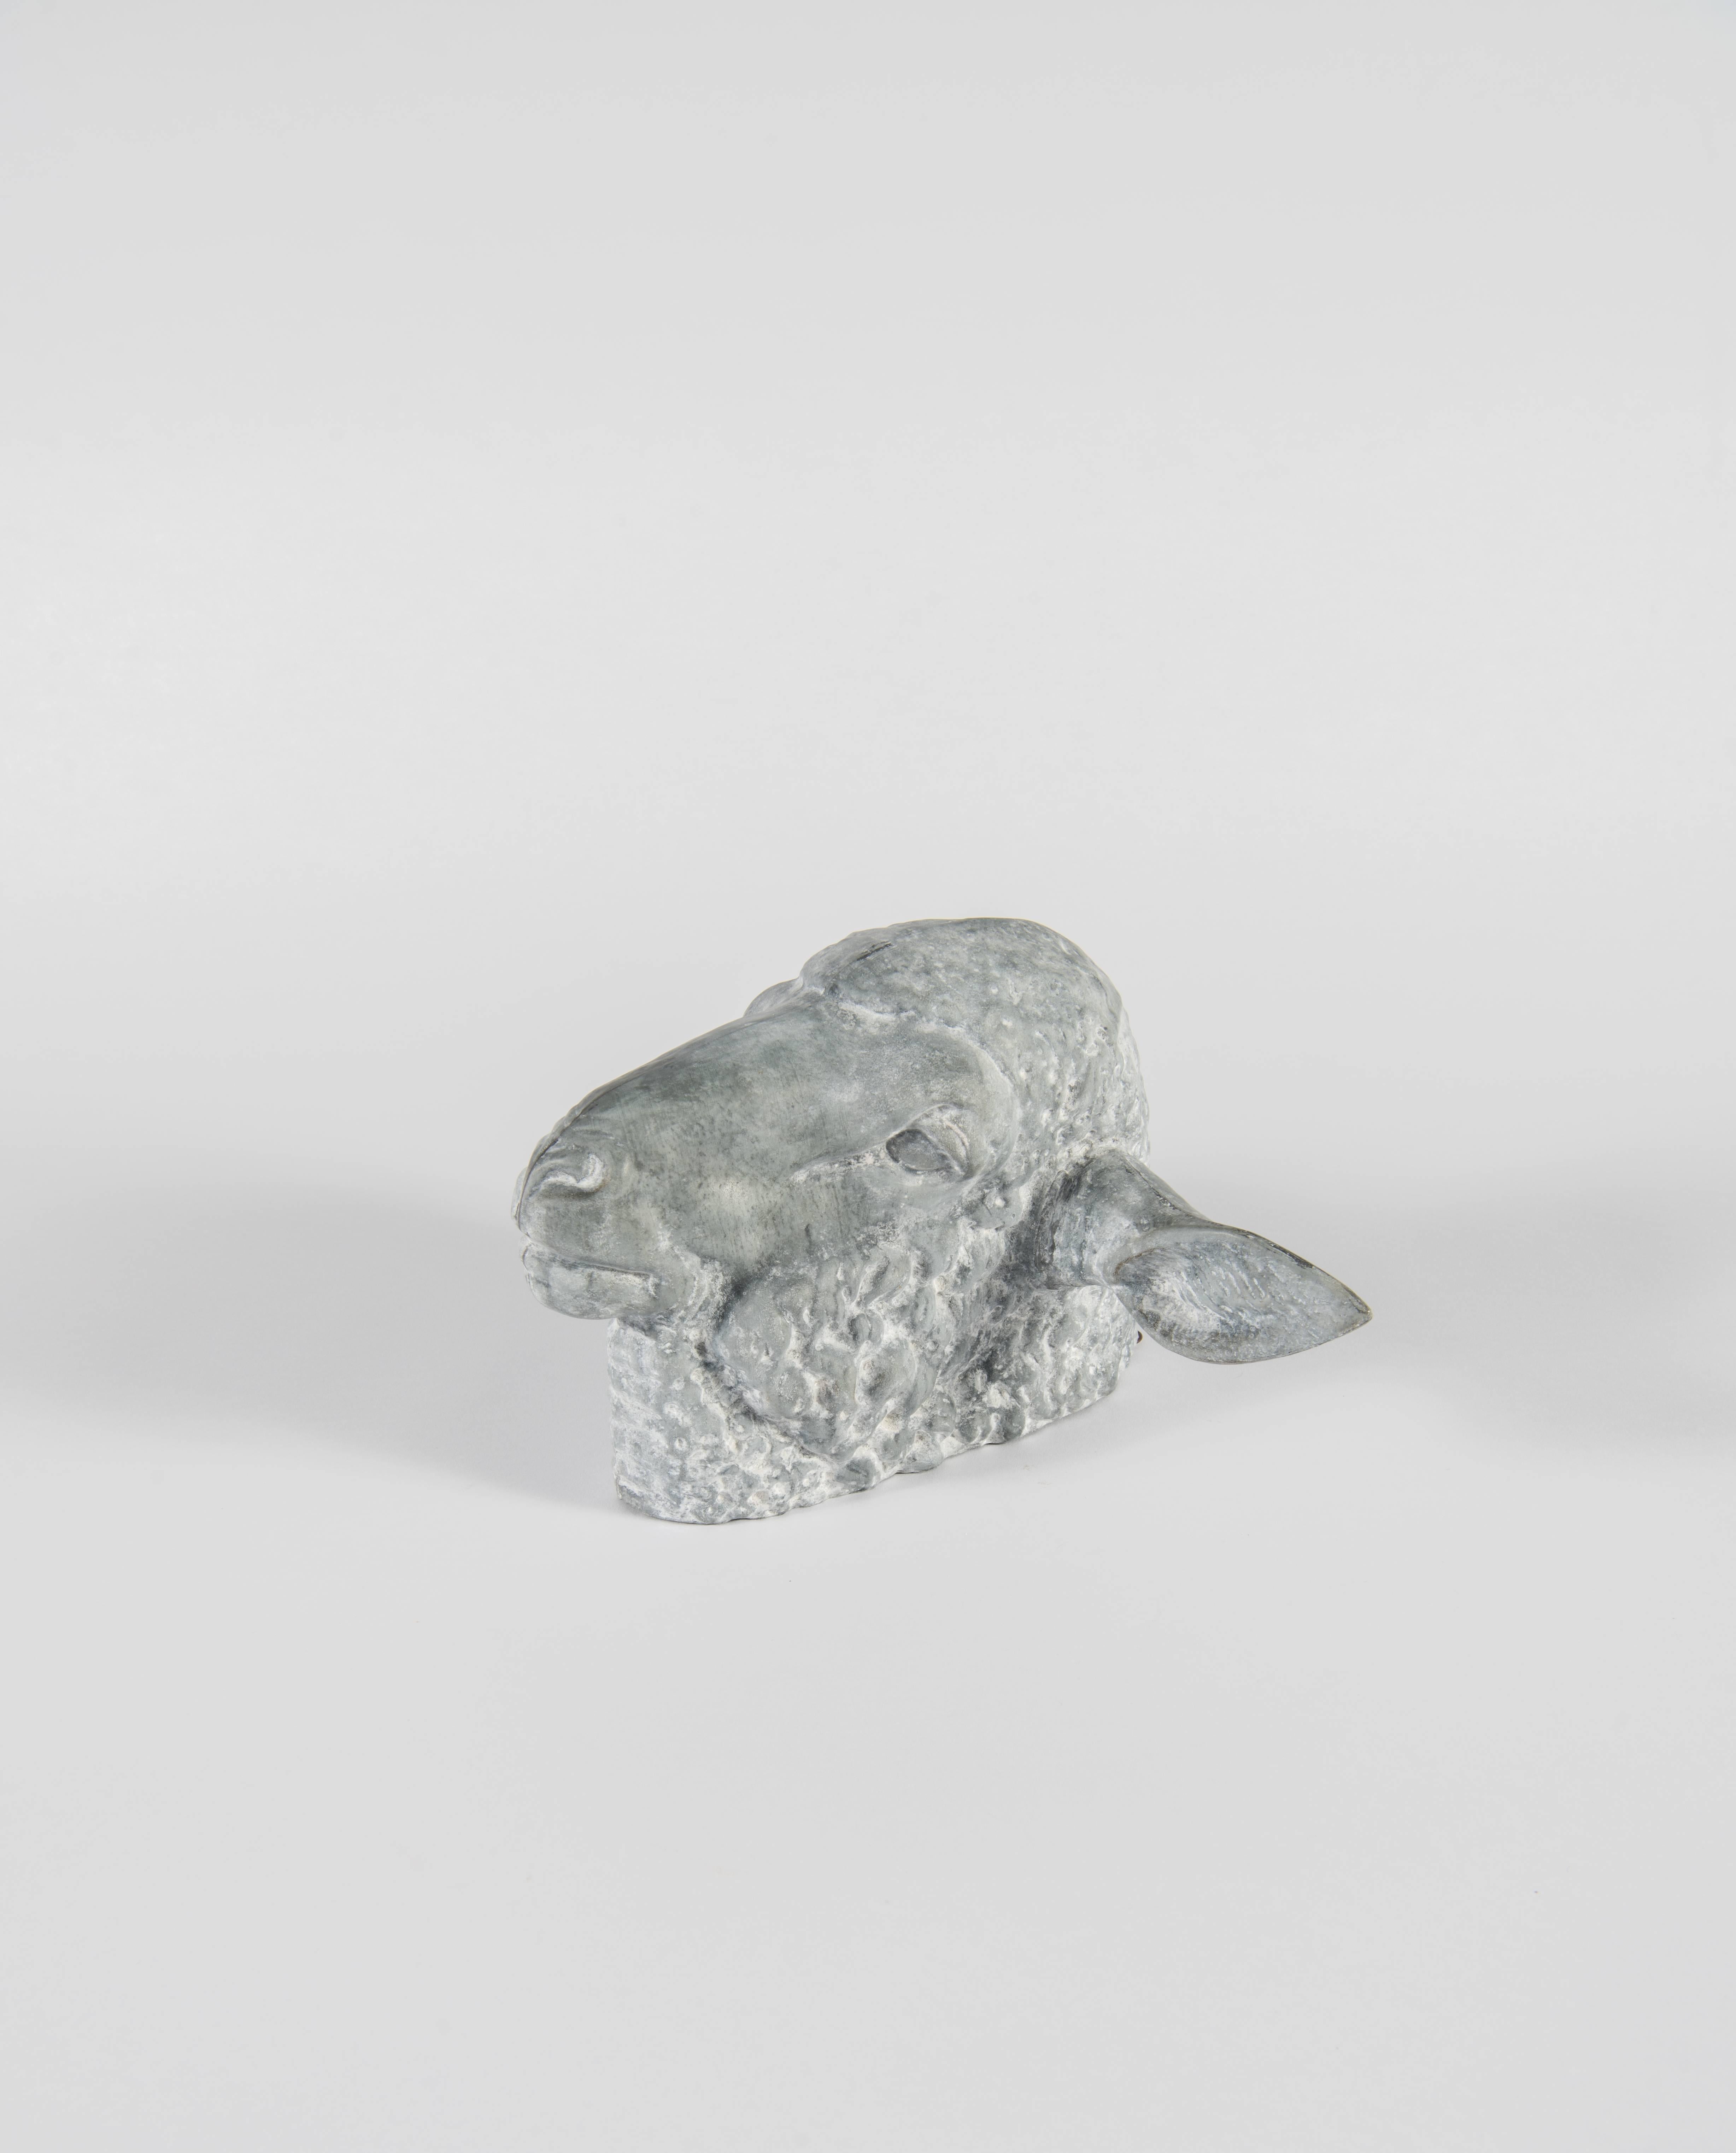 A hard-to-find zinc sheep's head with a nice dry whitish patina. Despite it's age, it is in very good condition and most likely never hung outside. The seams are sound and it has excellent detailing. With it's quirky ears and sweet face, it is a